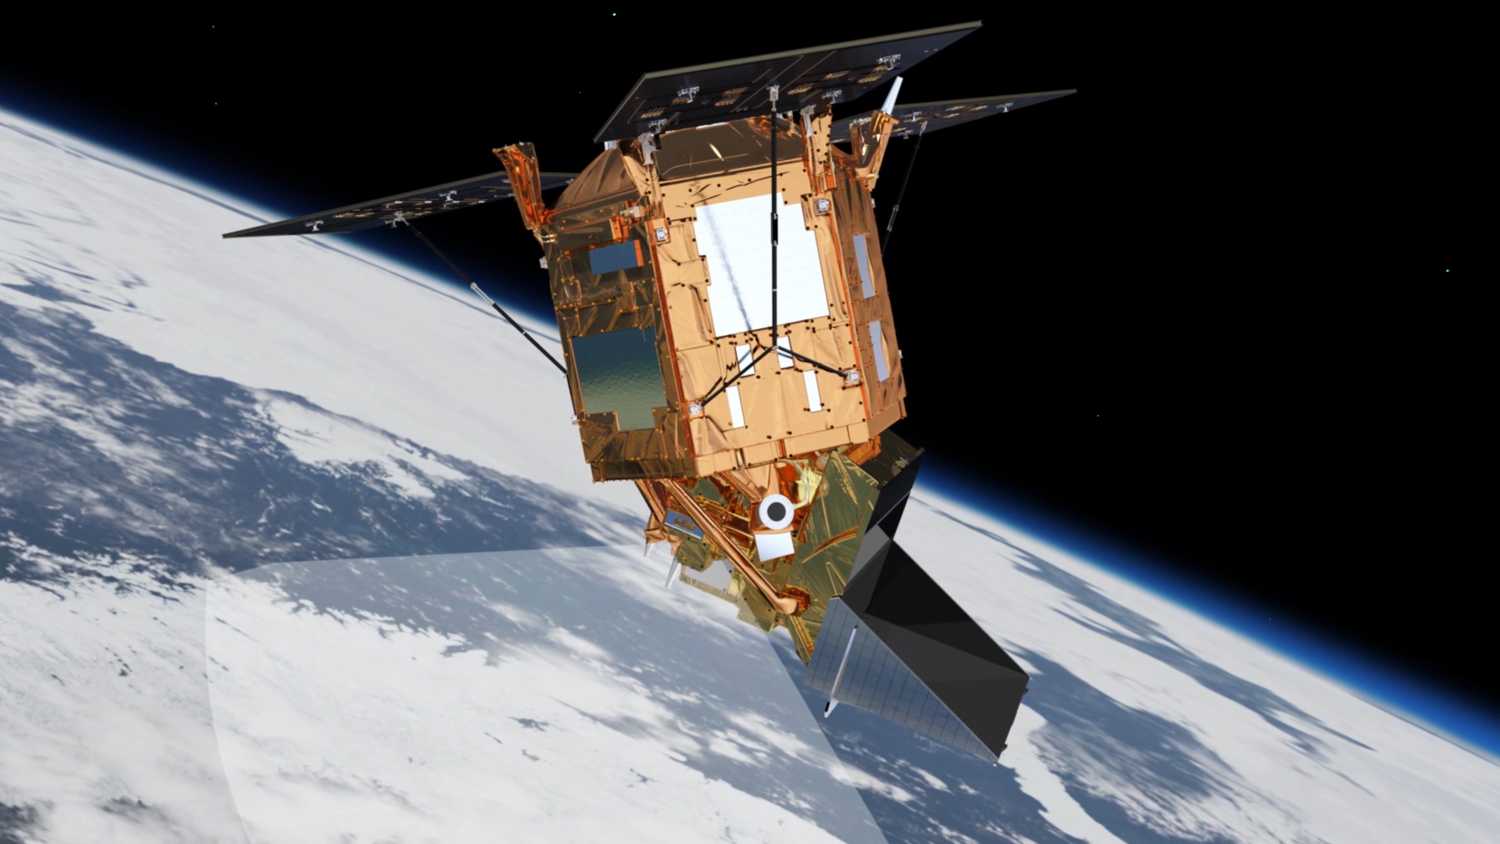 Assigned by NSO Dutch industry built the Tropomi-instrument, monitoring air quality on the Sentinel 5P satellite. 
